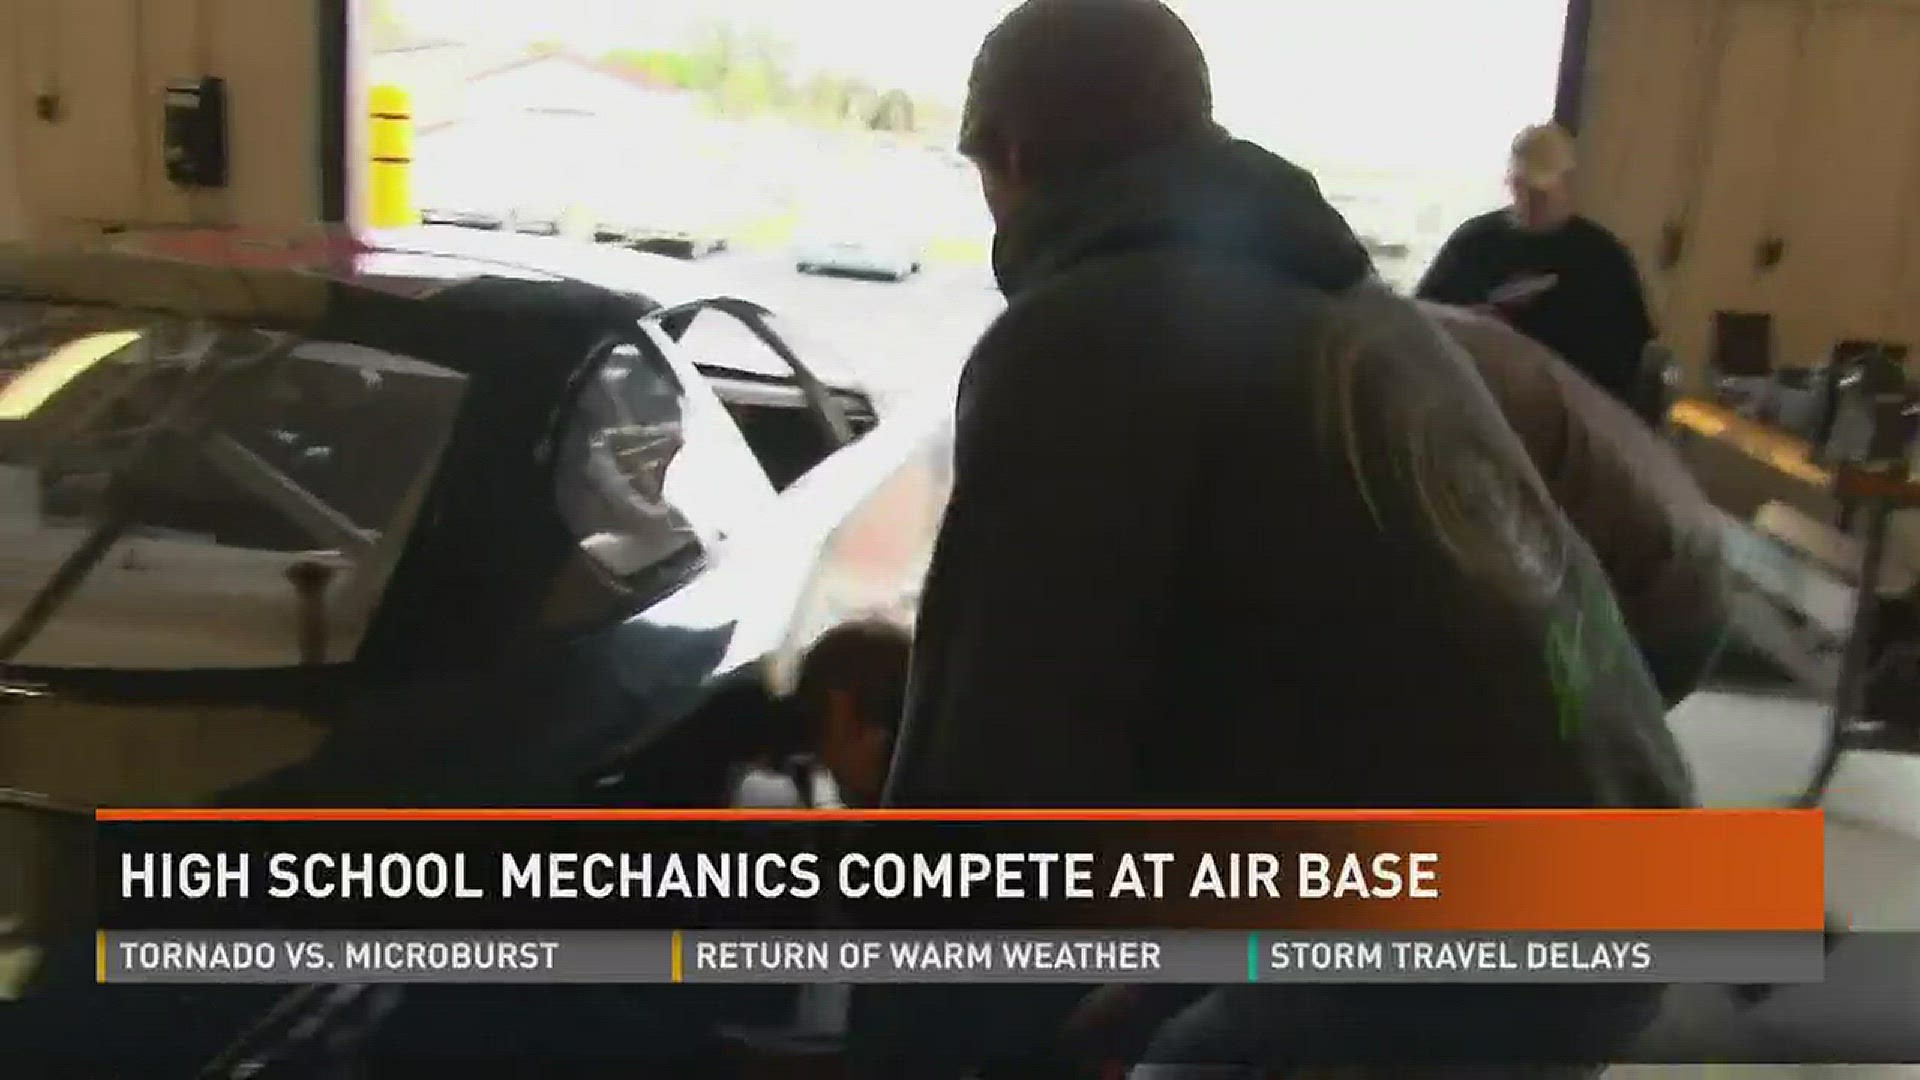 The Top Wrench competition brings students together to show off their mechanic skills and is a recruiting opportunity for the 134th Refueling Wing.